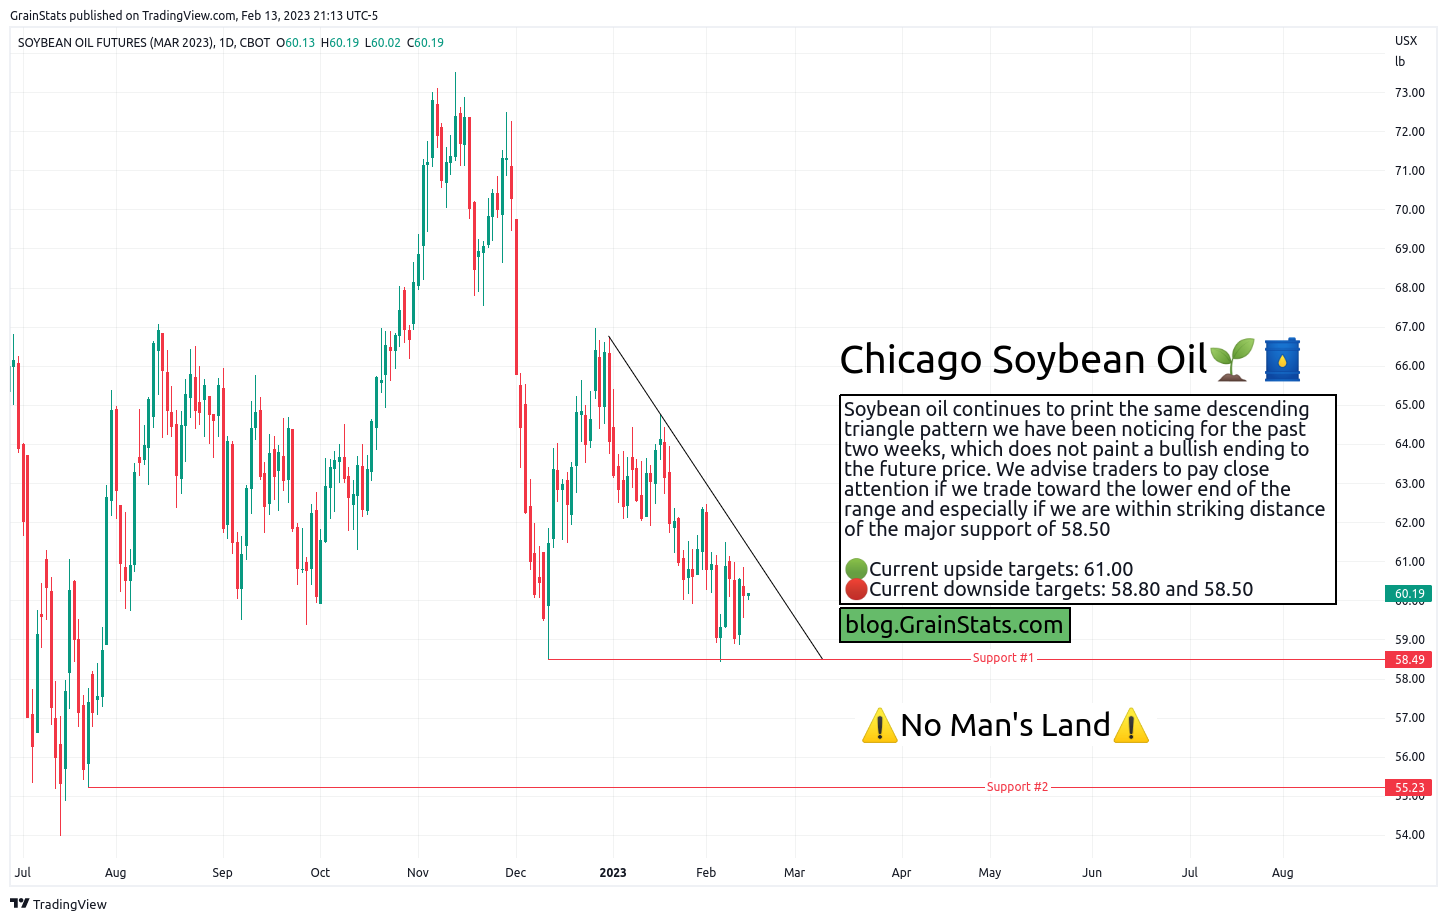 Soybean Oil Futures - Five Charts In Five Minutes - GrainStats